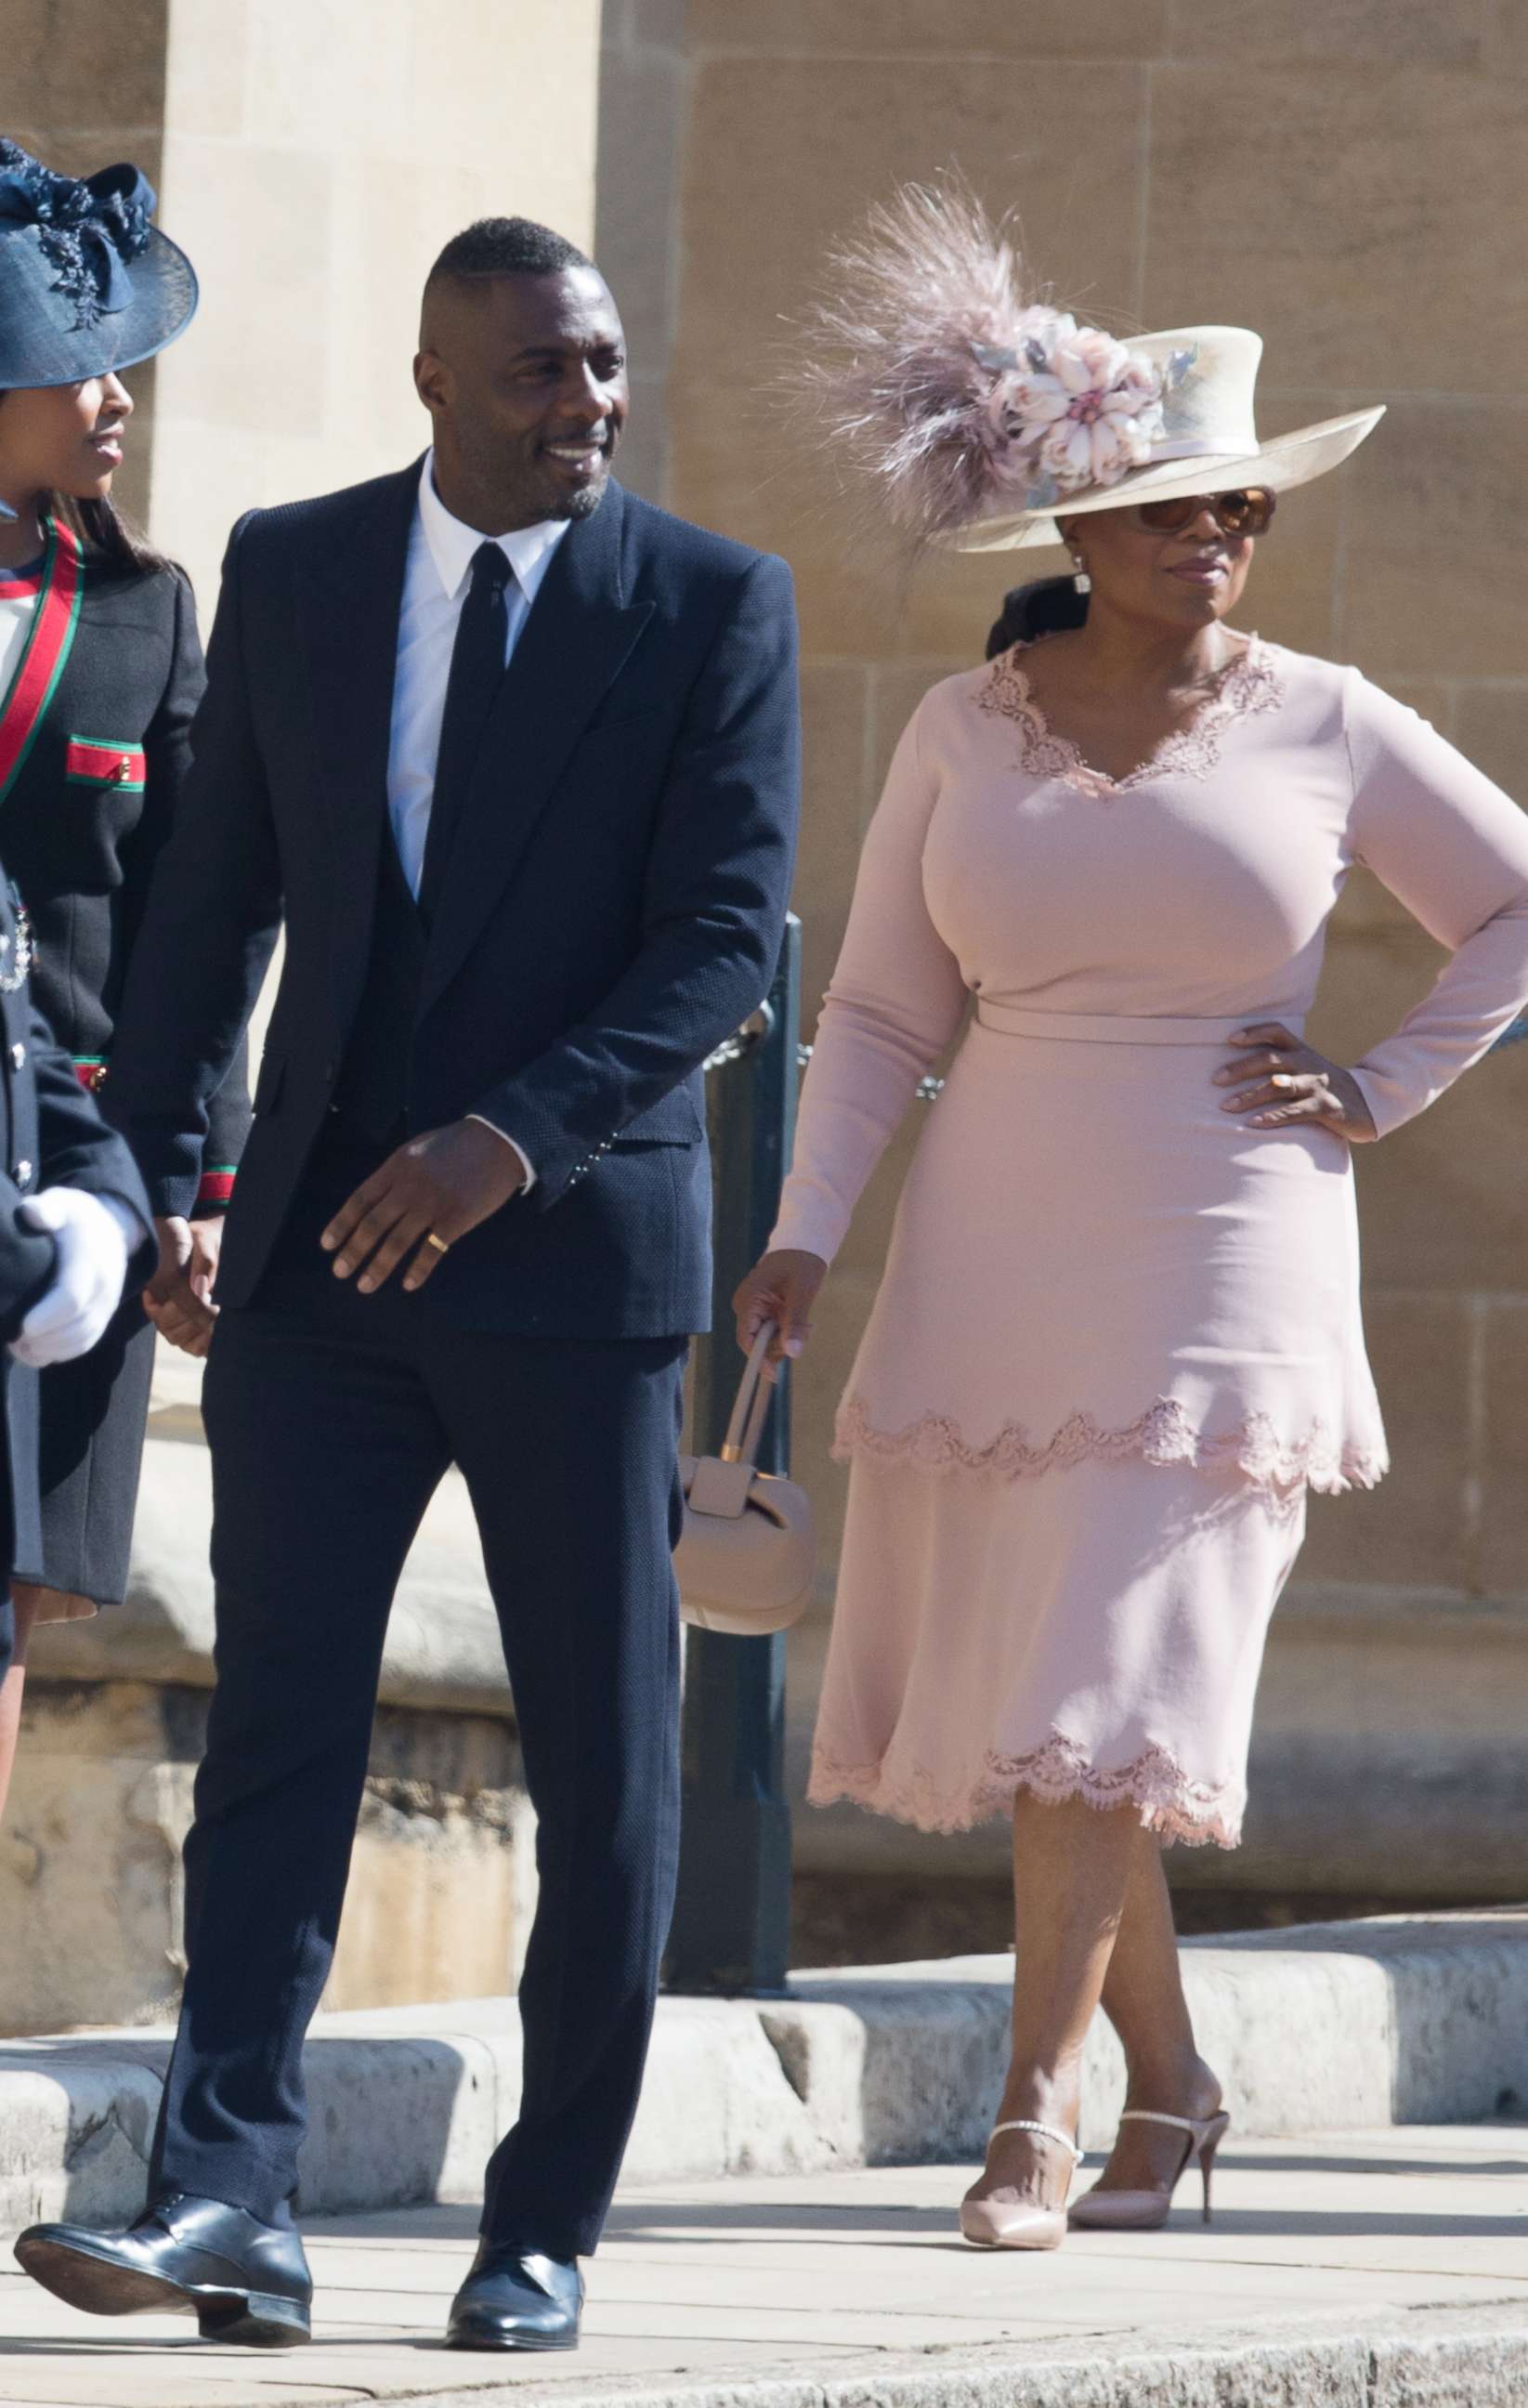 PHOTO: Oprah Winfrey and Idris Elba attend the wedding of Prince Harry and Meghan Markle at St. George's Chapel, Windsor Castle on May 19, 2018 in Windsor, England.